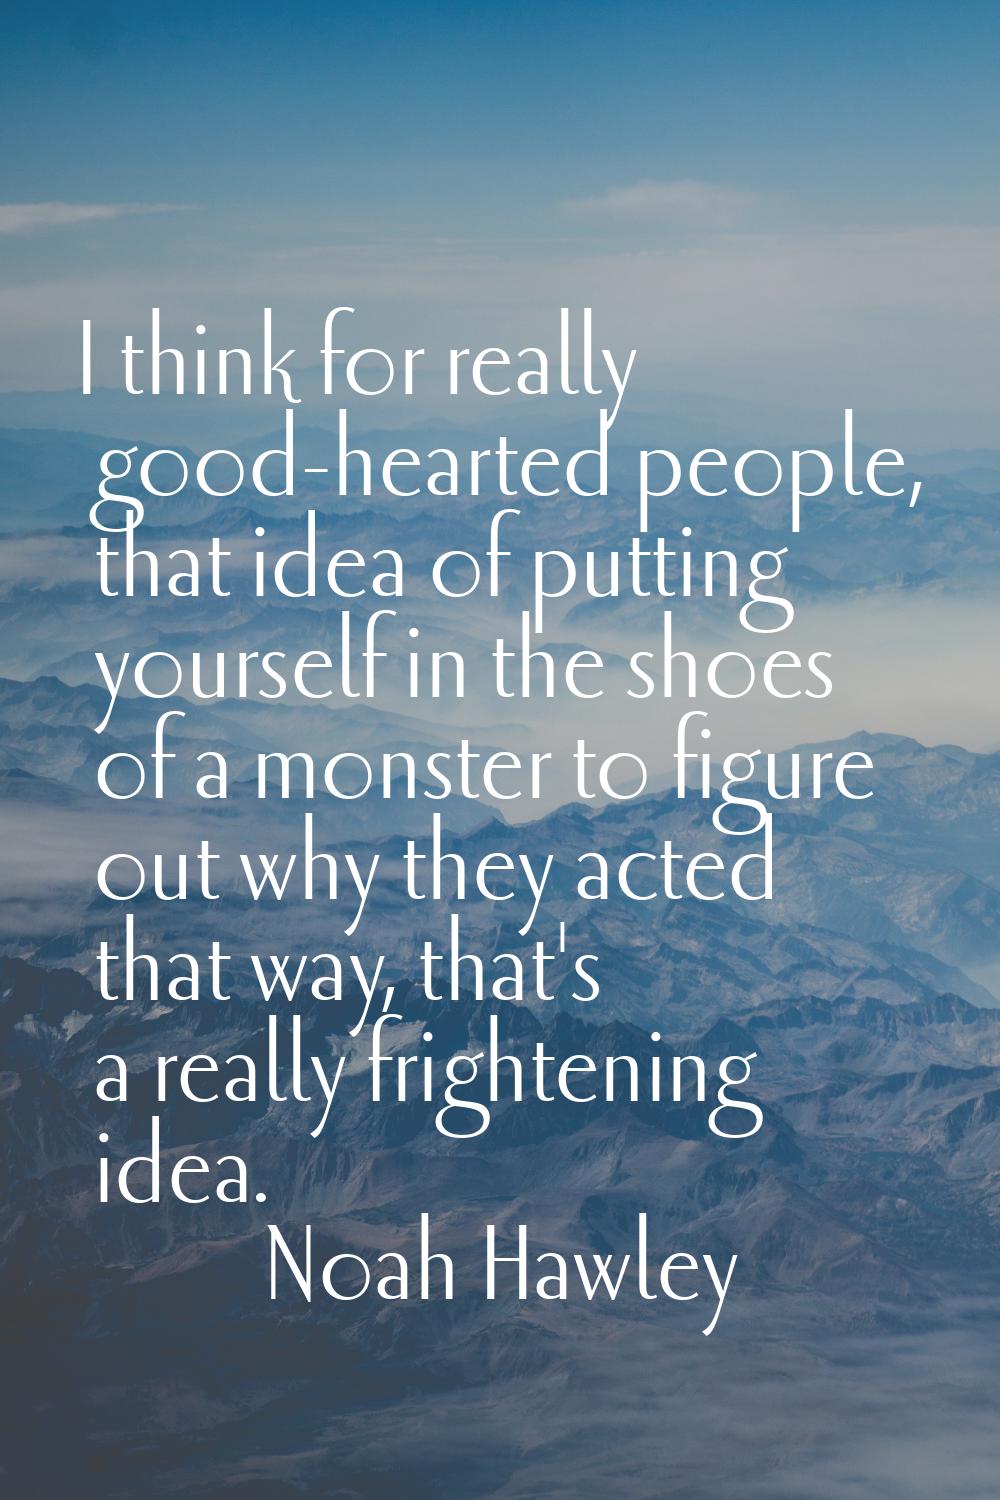 I think for really good-hearted people, that idea of putting yourself in the shoes of a monster to 